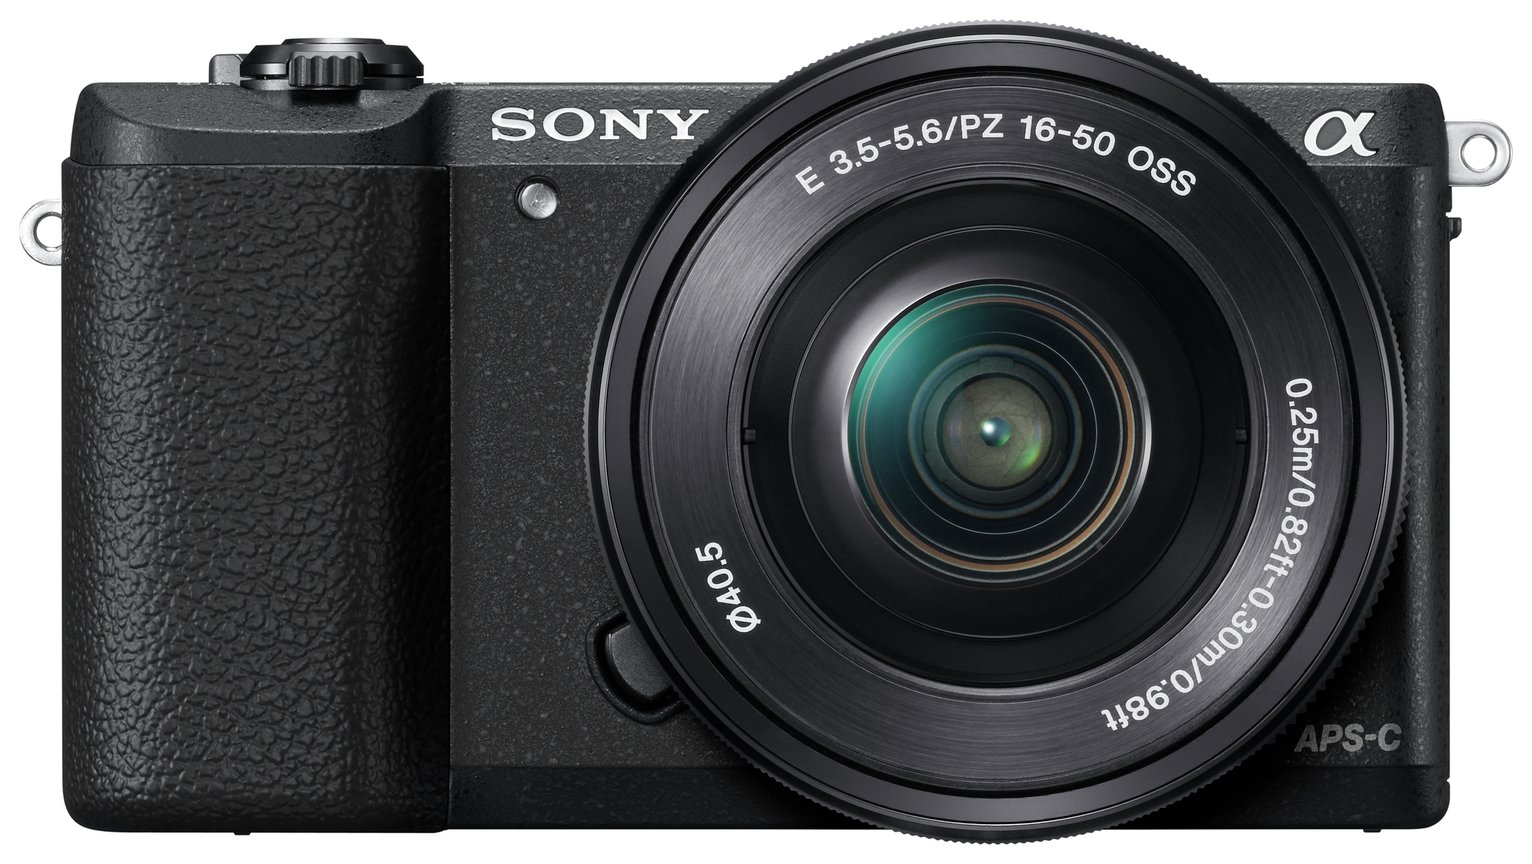 Sony A5100 Mirrorless Camera With 16-50mm Lens